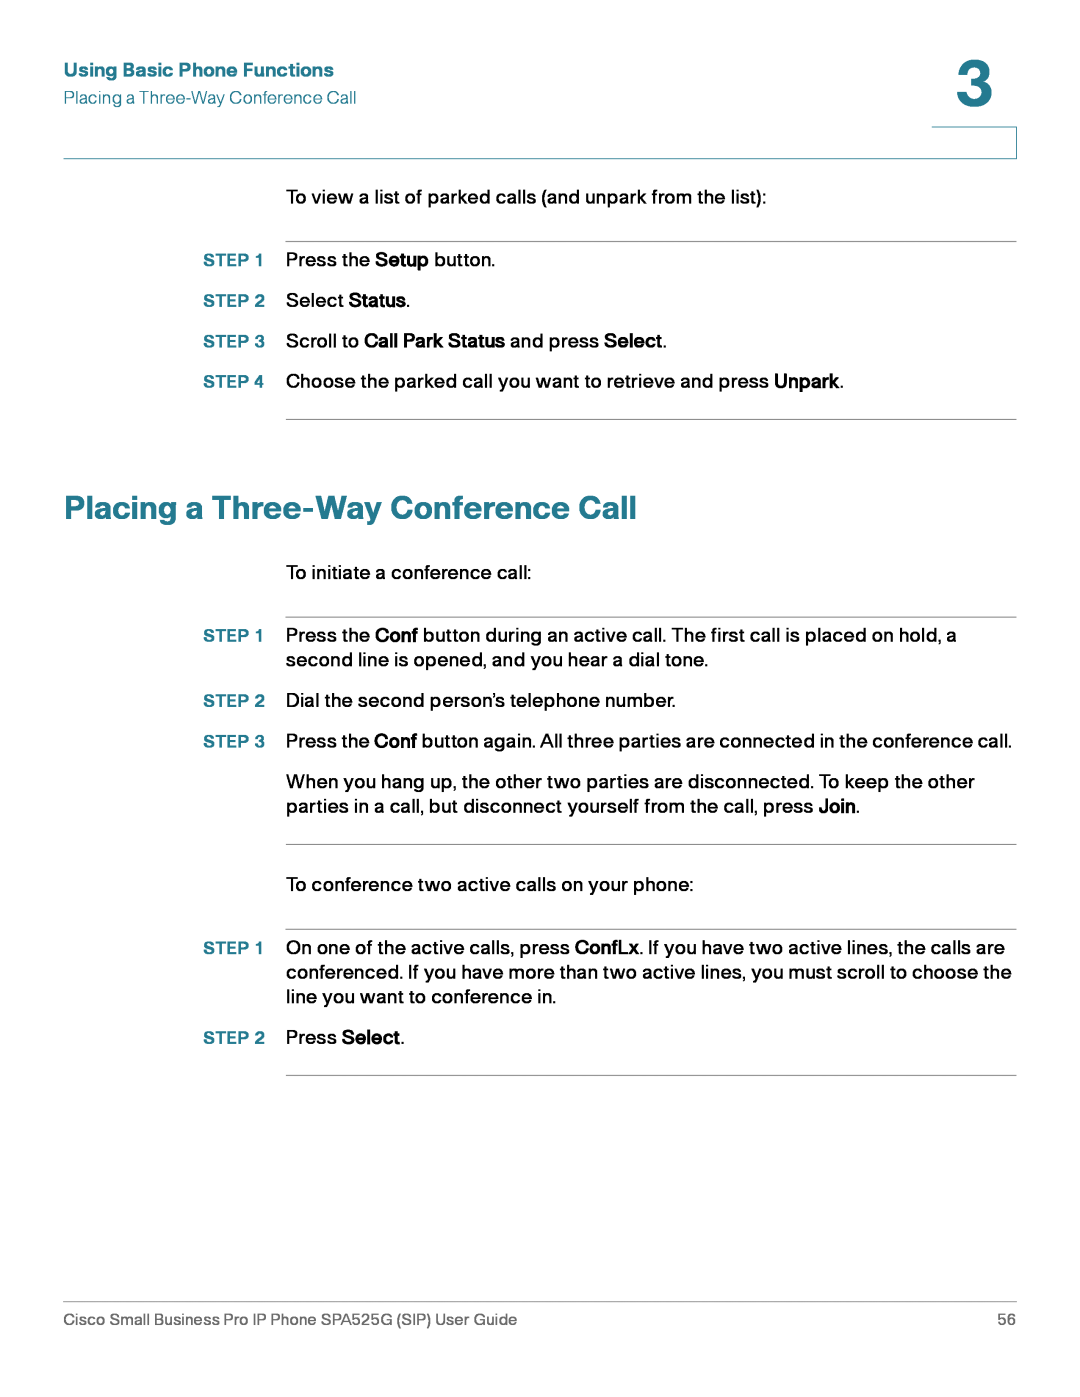 Cisco Systems SPA525G manual Placing a Three-Way Conference Call, Using Basic Phone Functions 